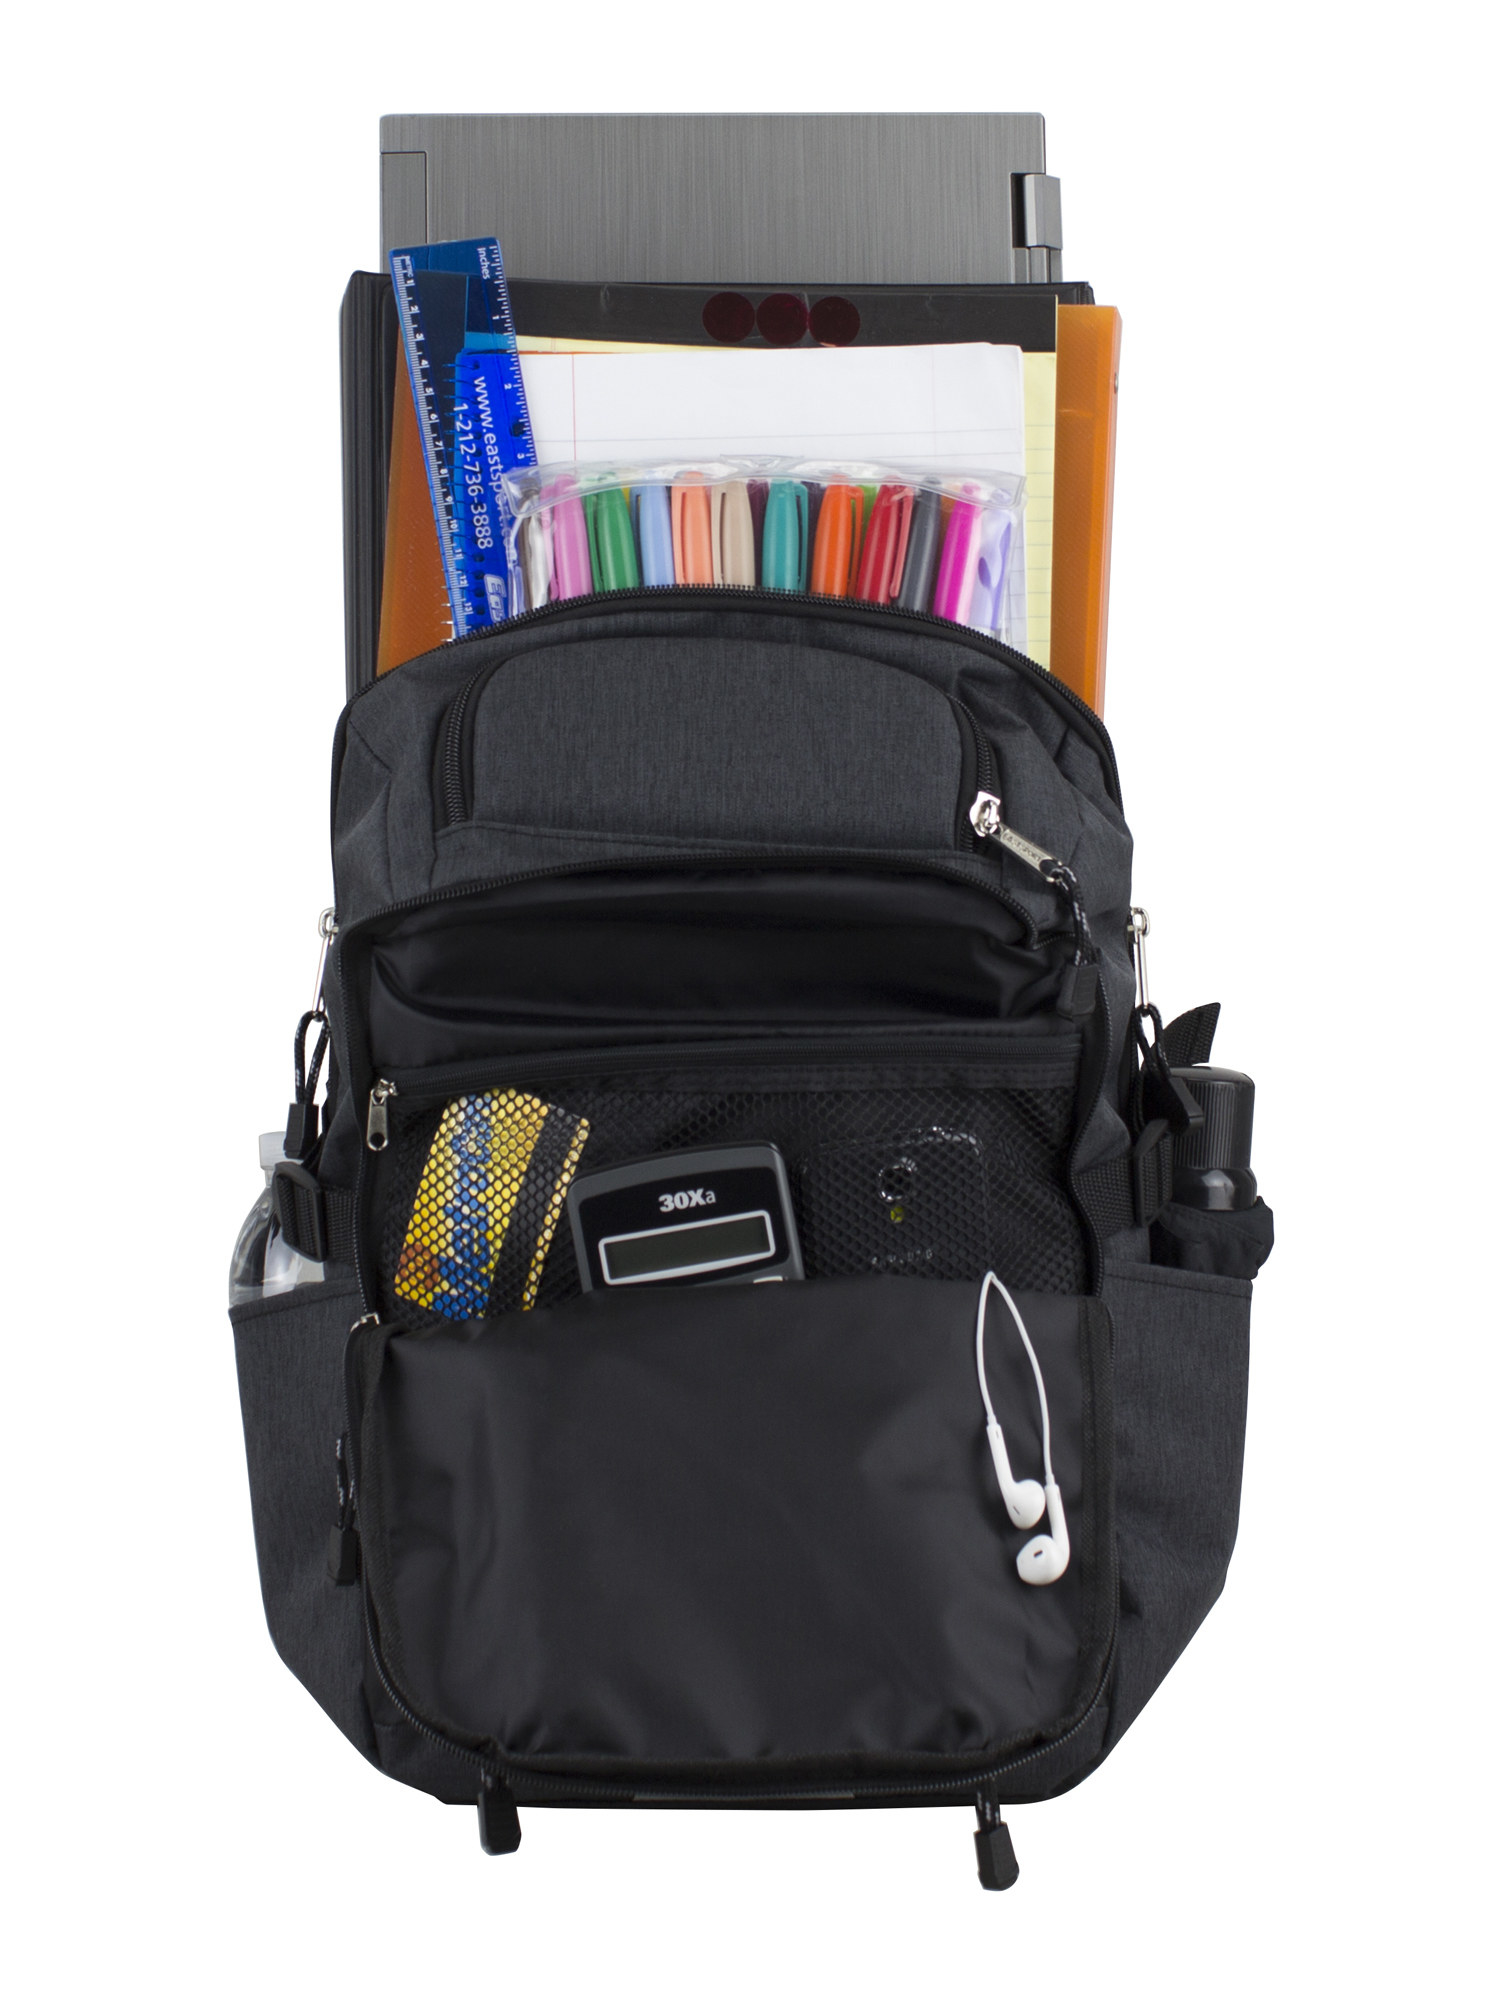 The backpack in black, featuring a variety of pockets for storage